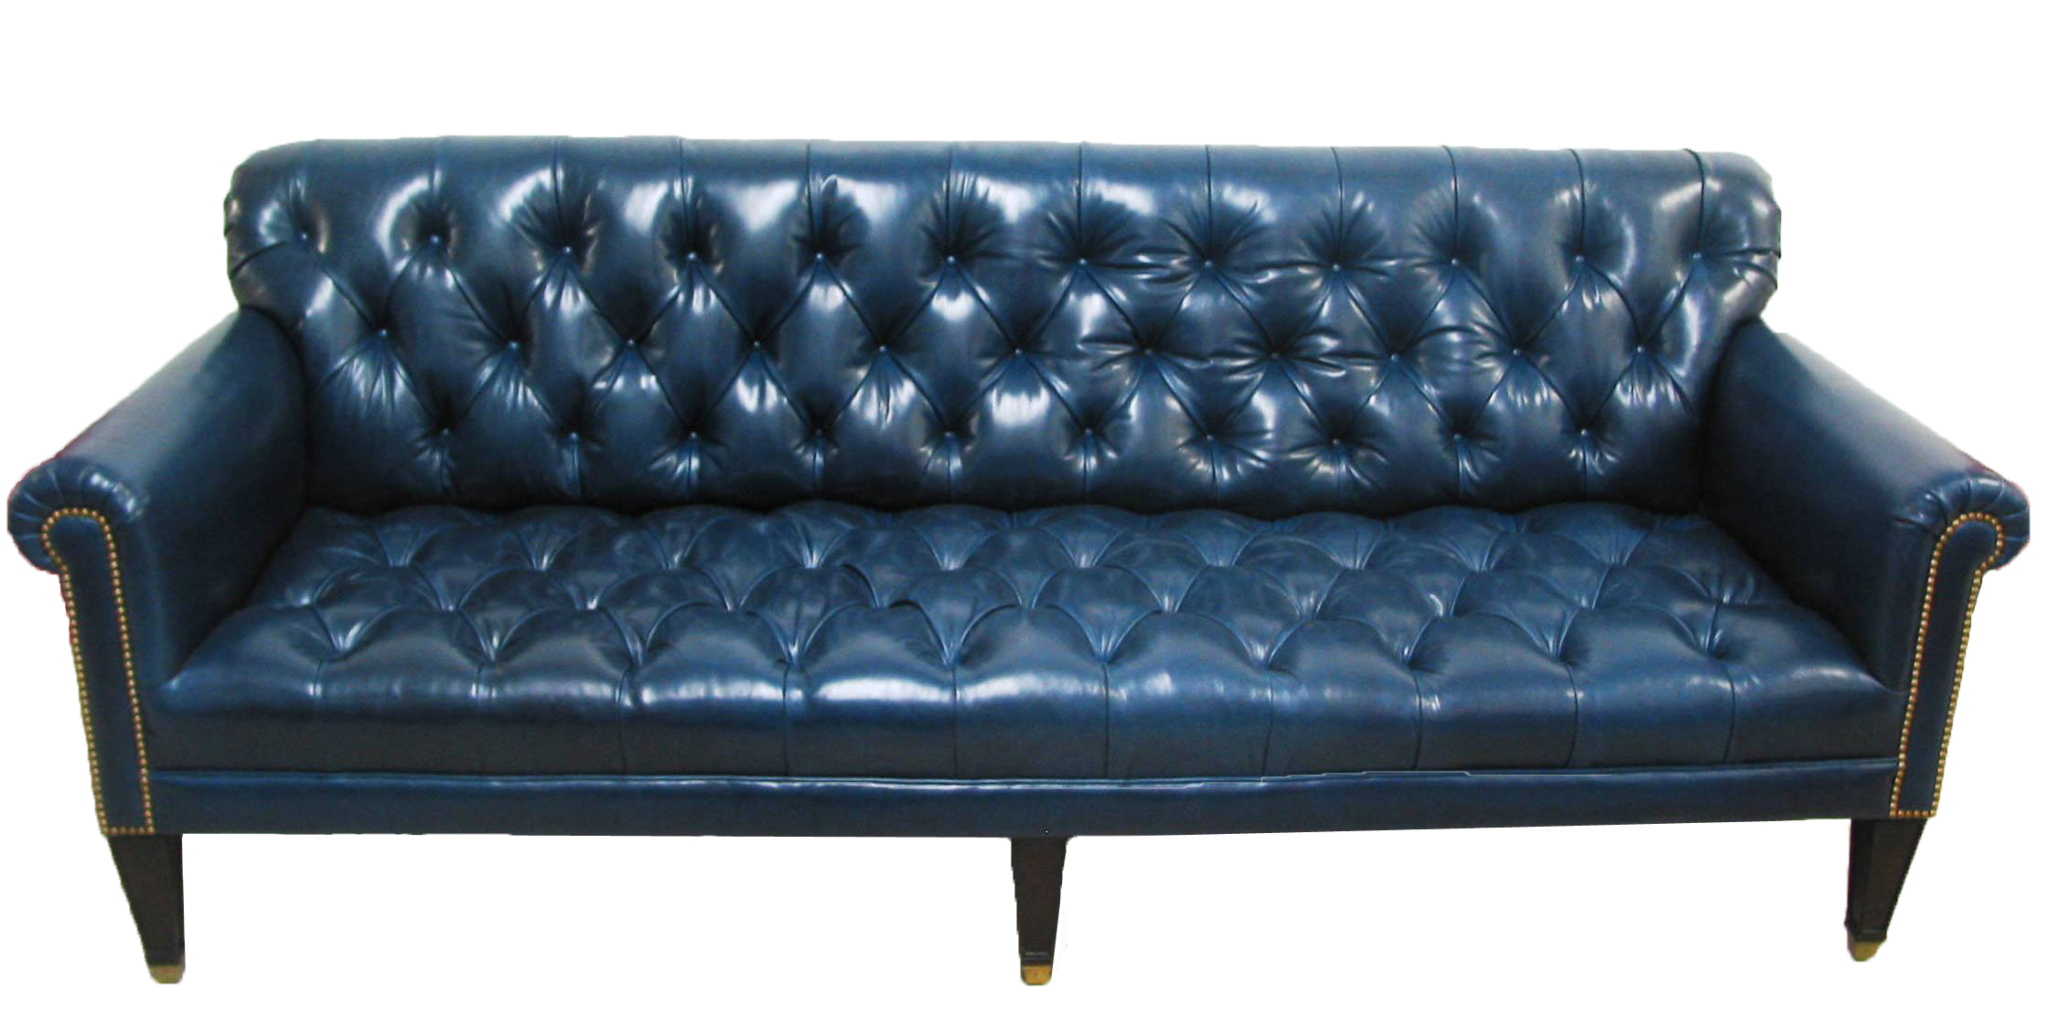 Leather Rer Can Do For You Dr Sofa, Leather Restoration Chicago